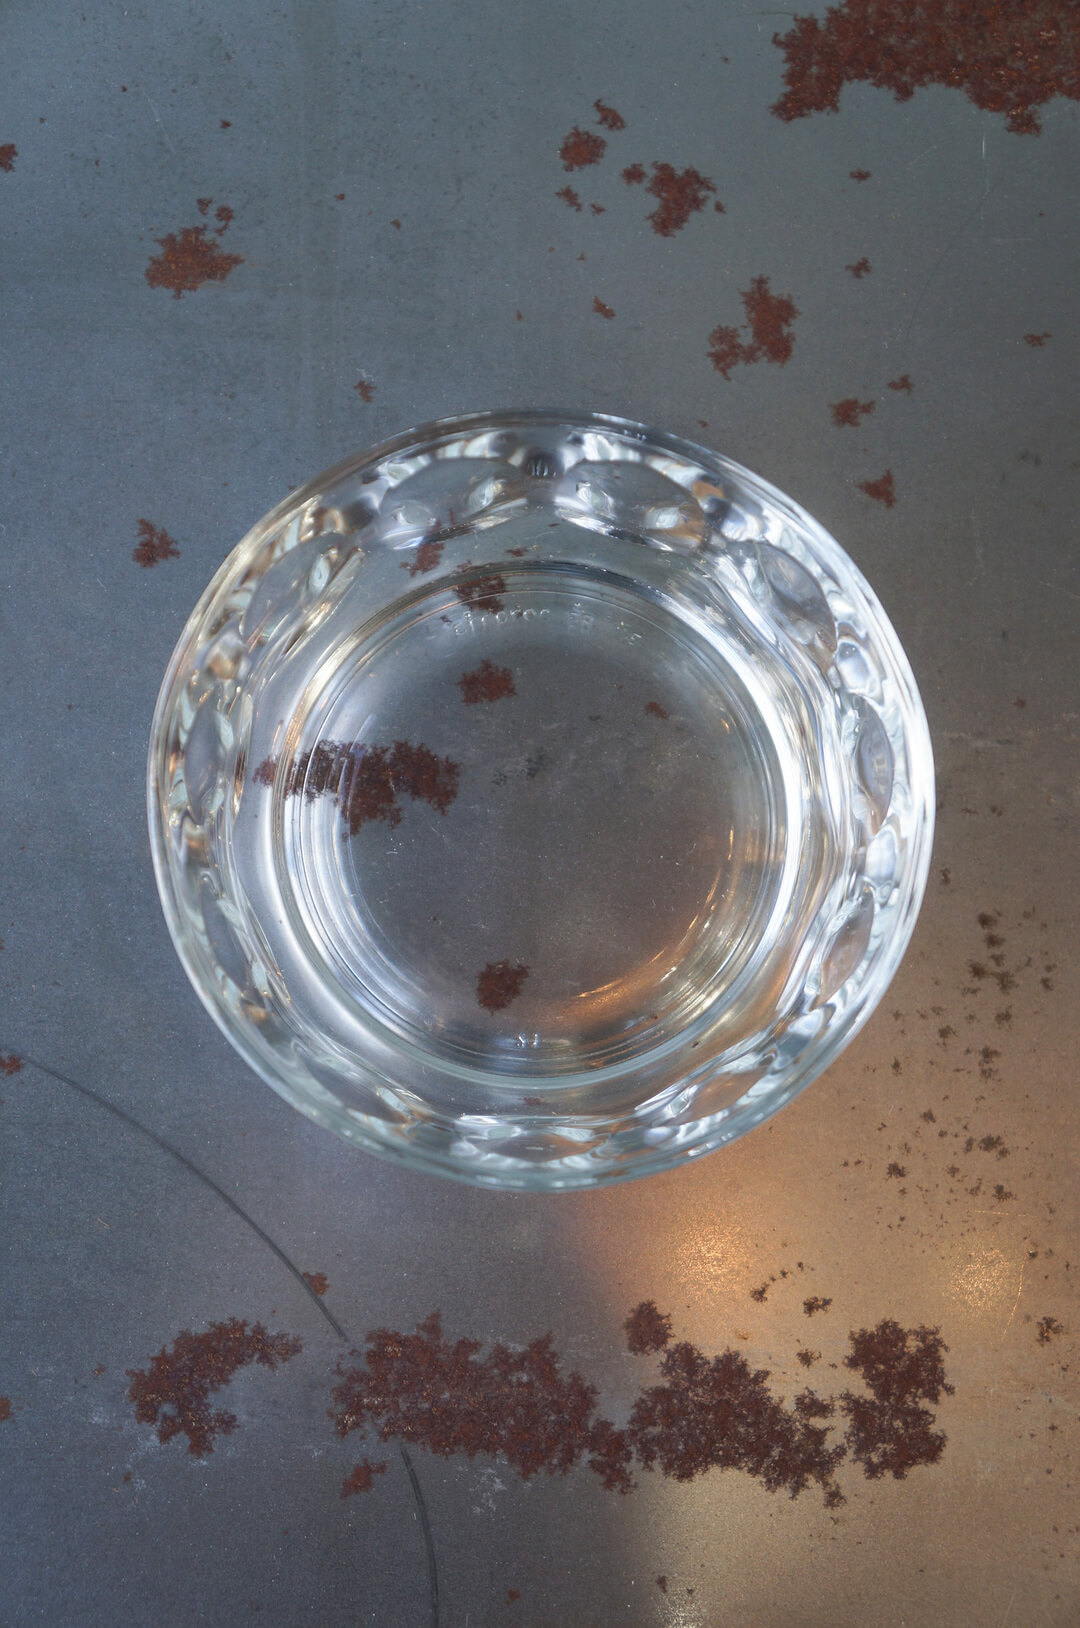 arcoroc Bowl Glass Ware Made In France/アルコロック ボウル ガラス フランス製 食器 レトロ 2